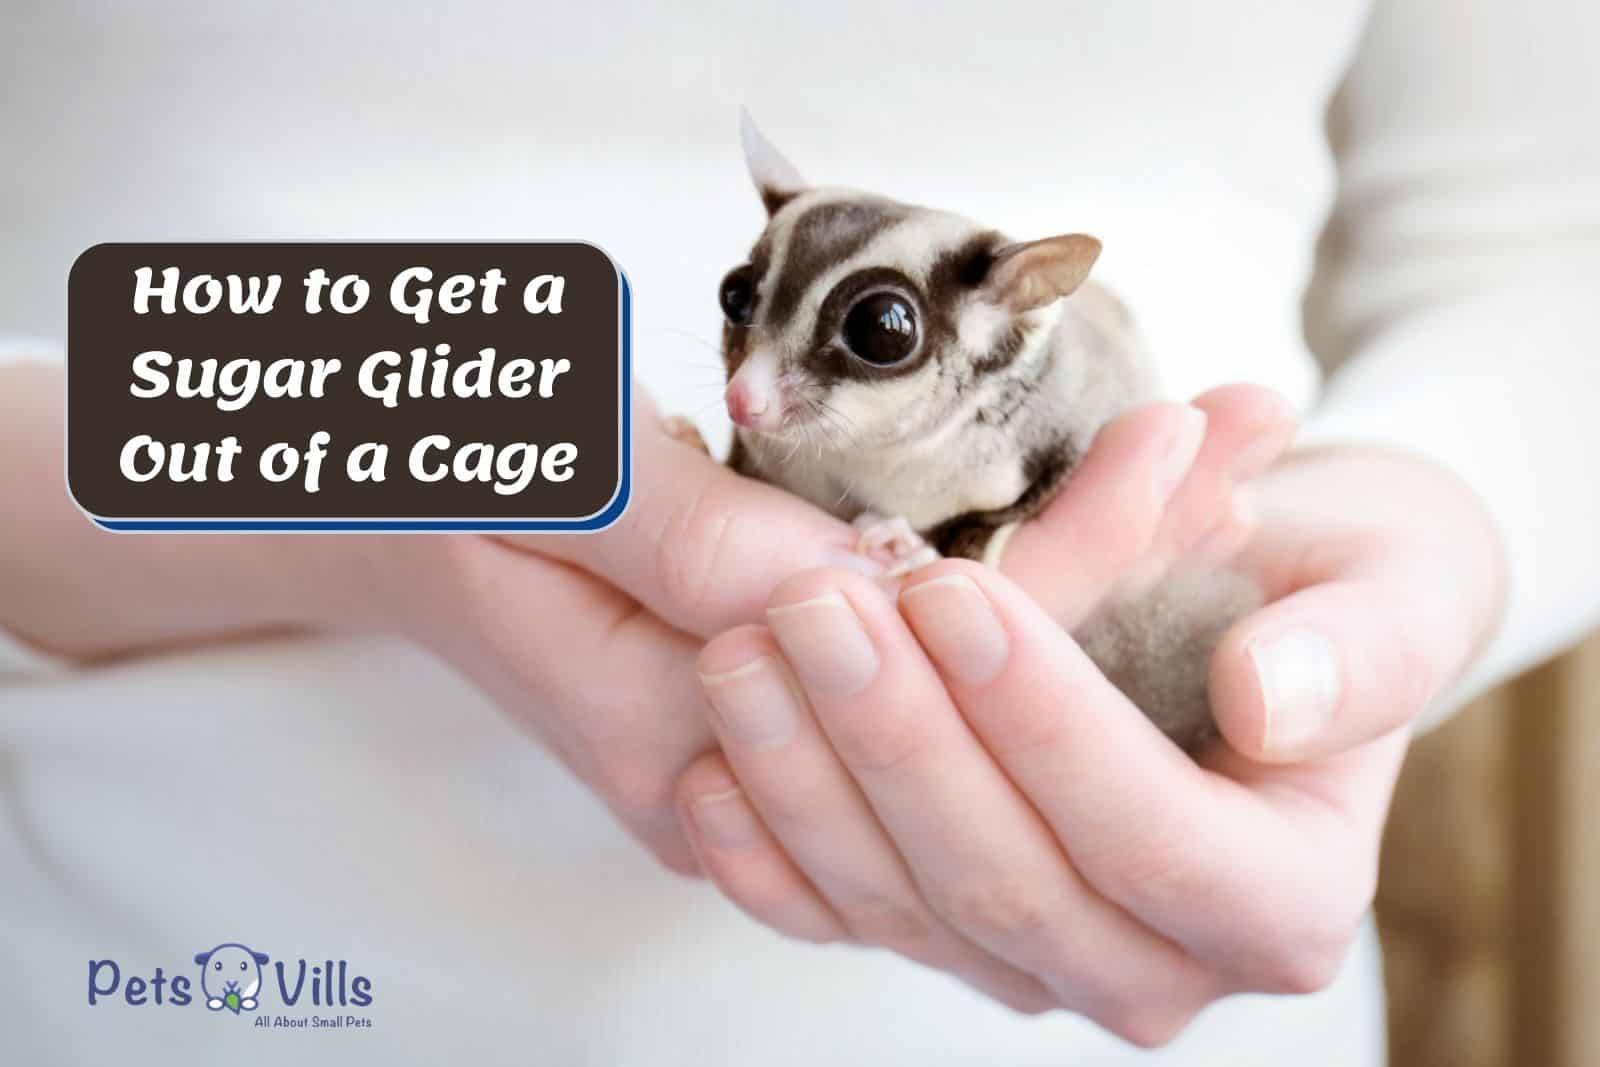 glider owner showing how to get a sugar glider out of cage